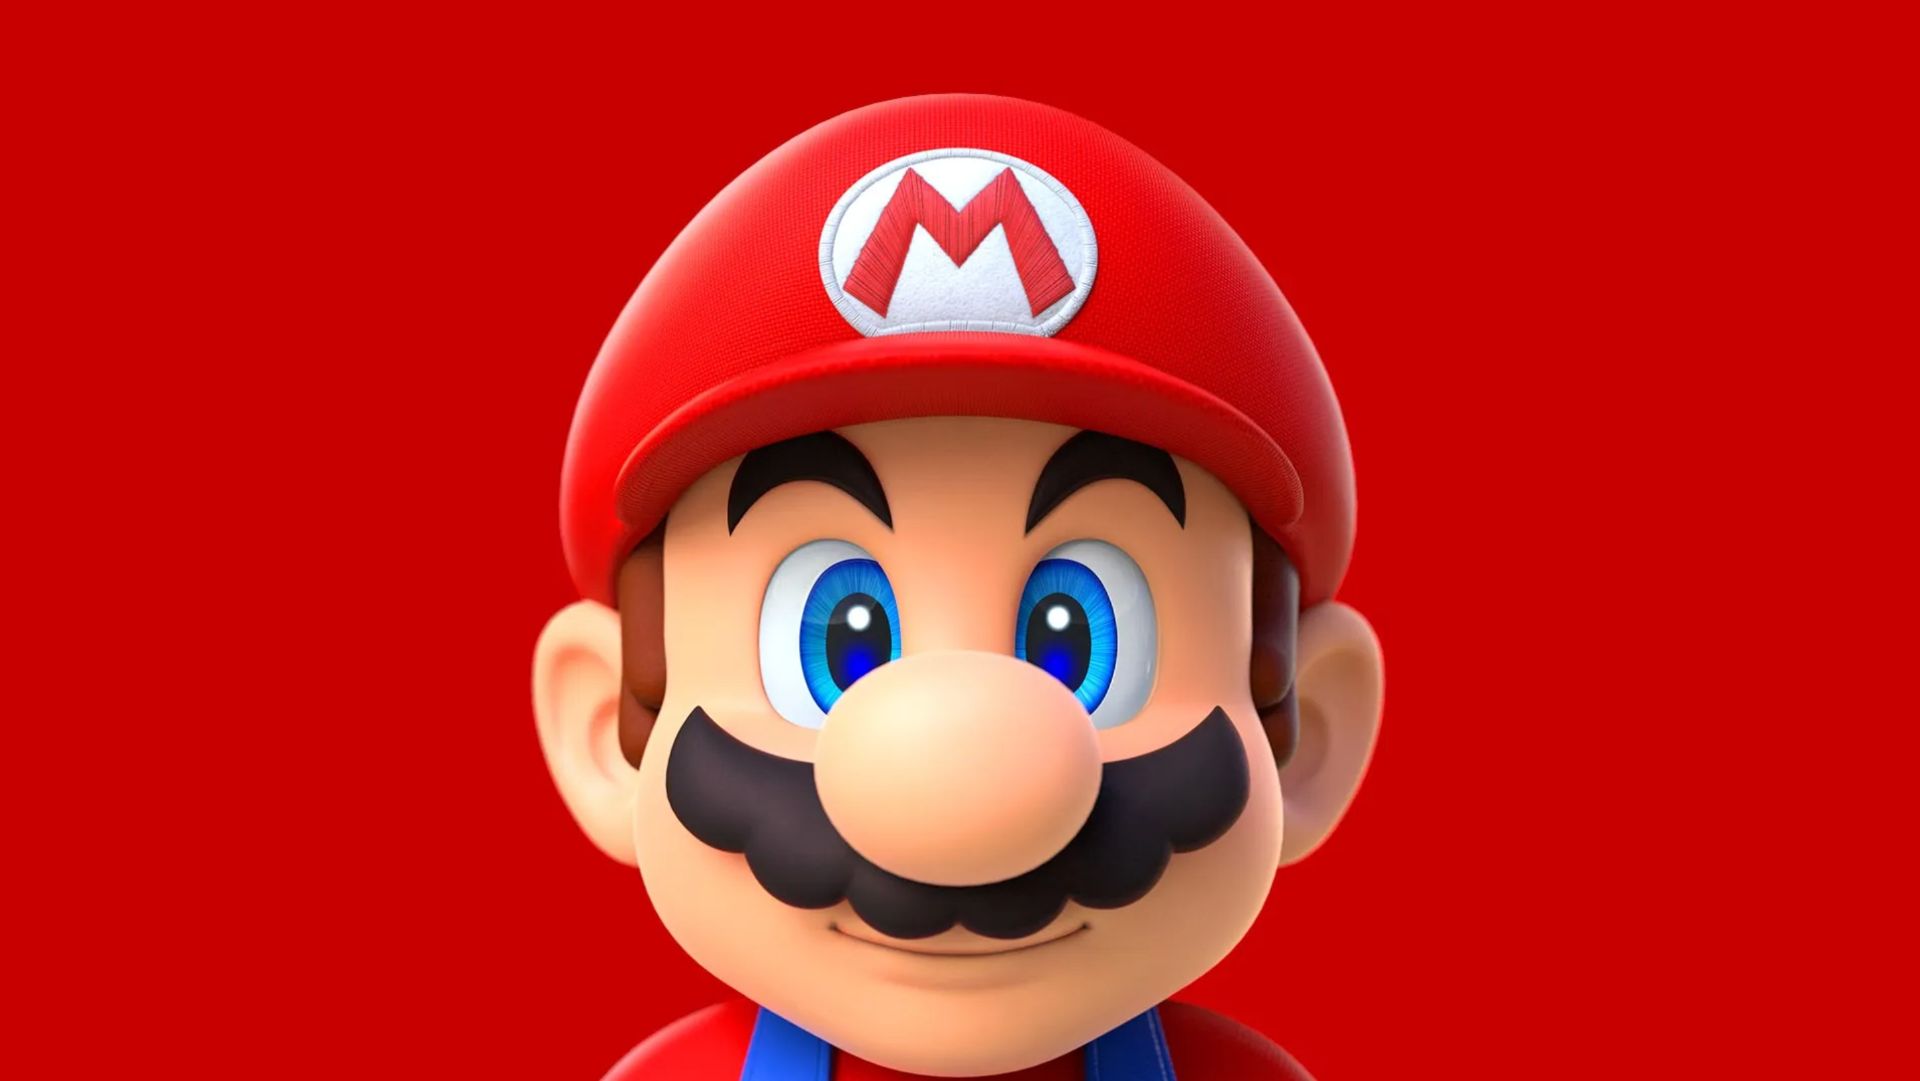 Mario smiling in red key art for Super Mario Run on mobile.